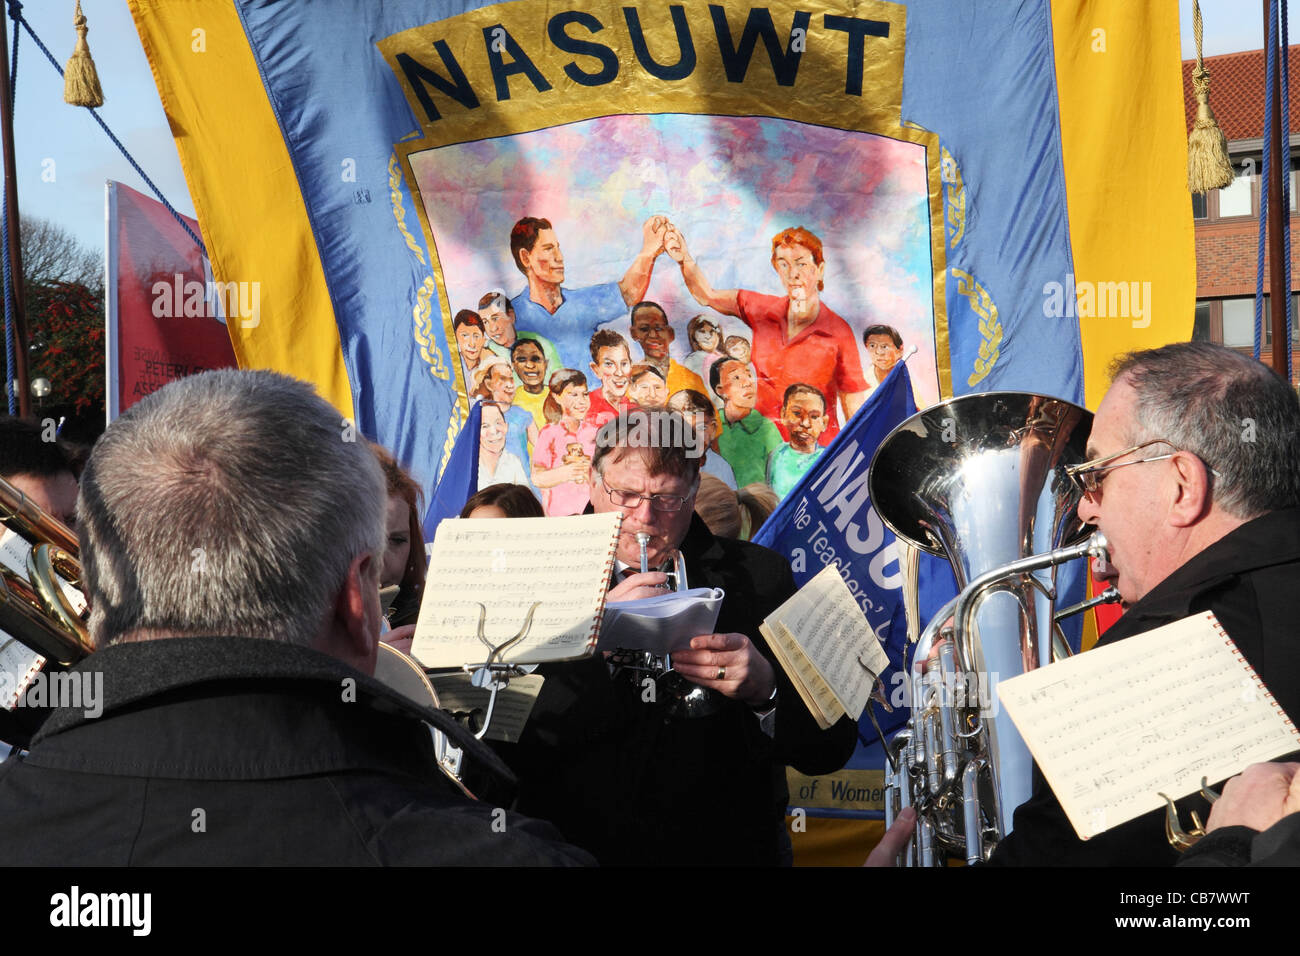 Brass band plays before NASUWT banner, TUC day of action, Gateshead, north east England, UK Stock Photo